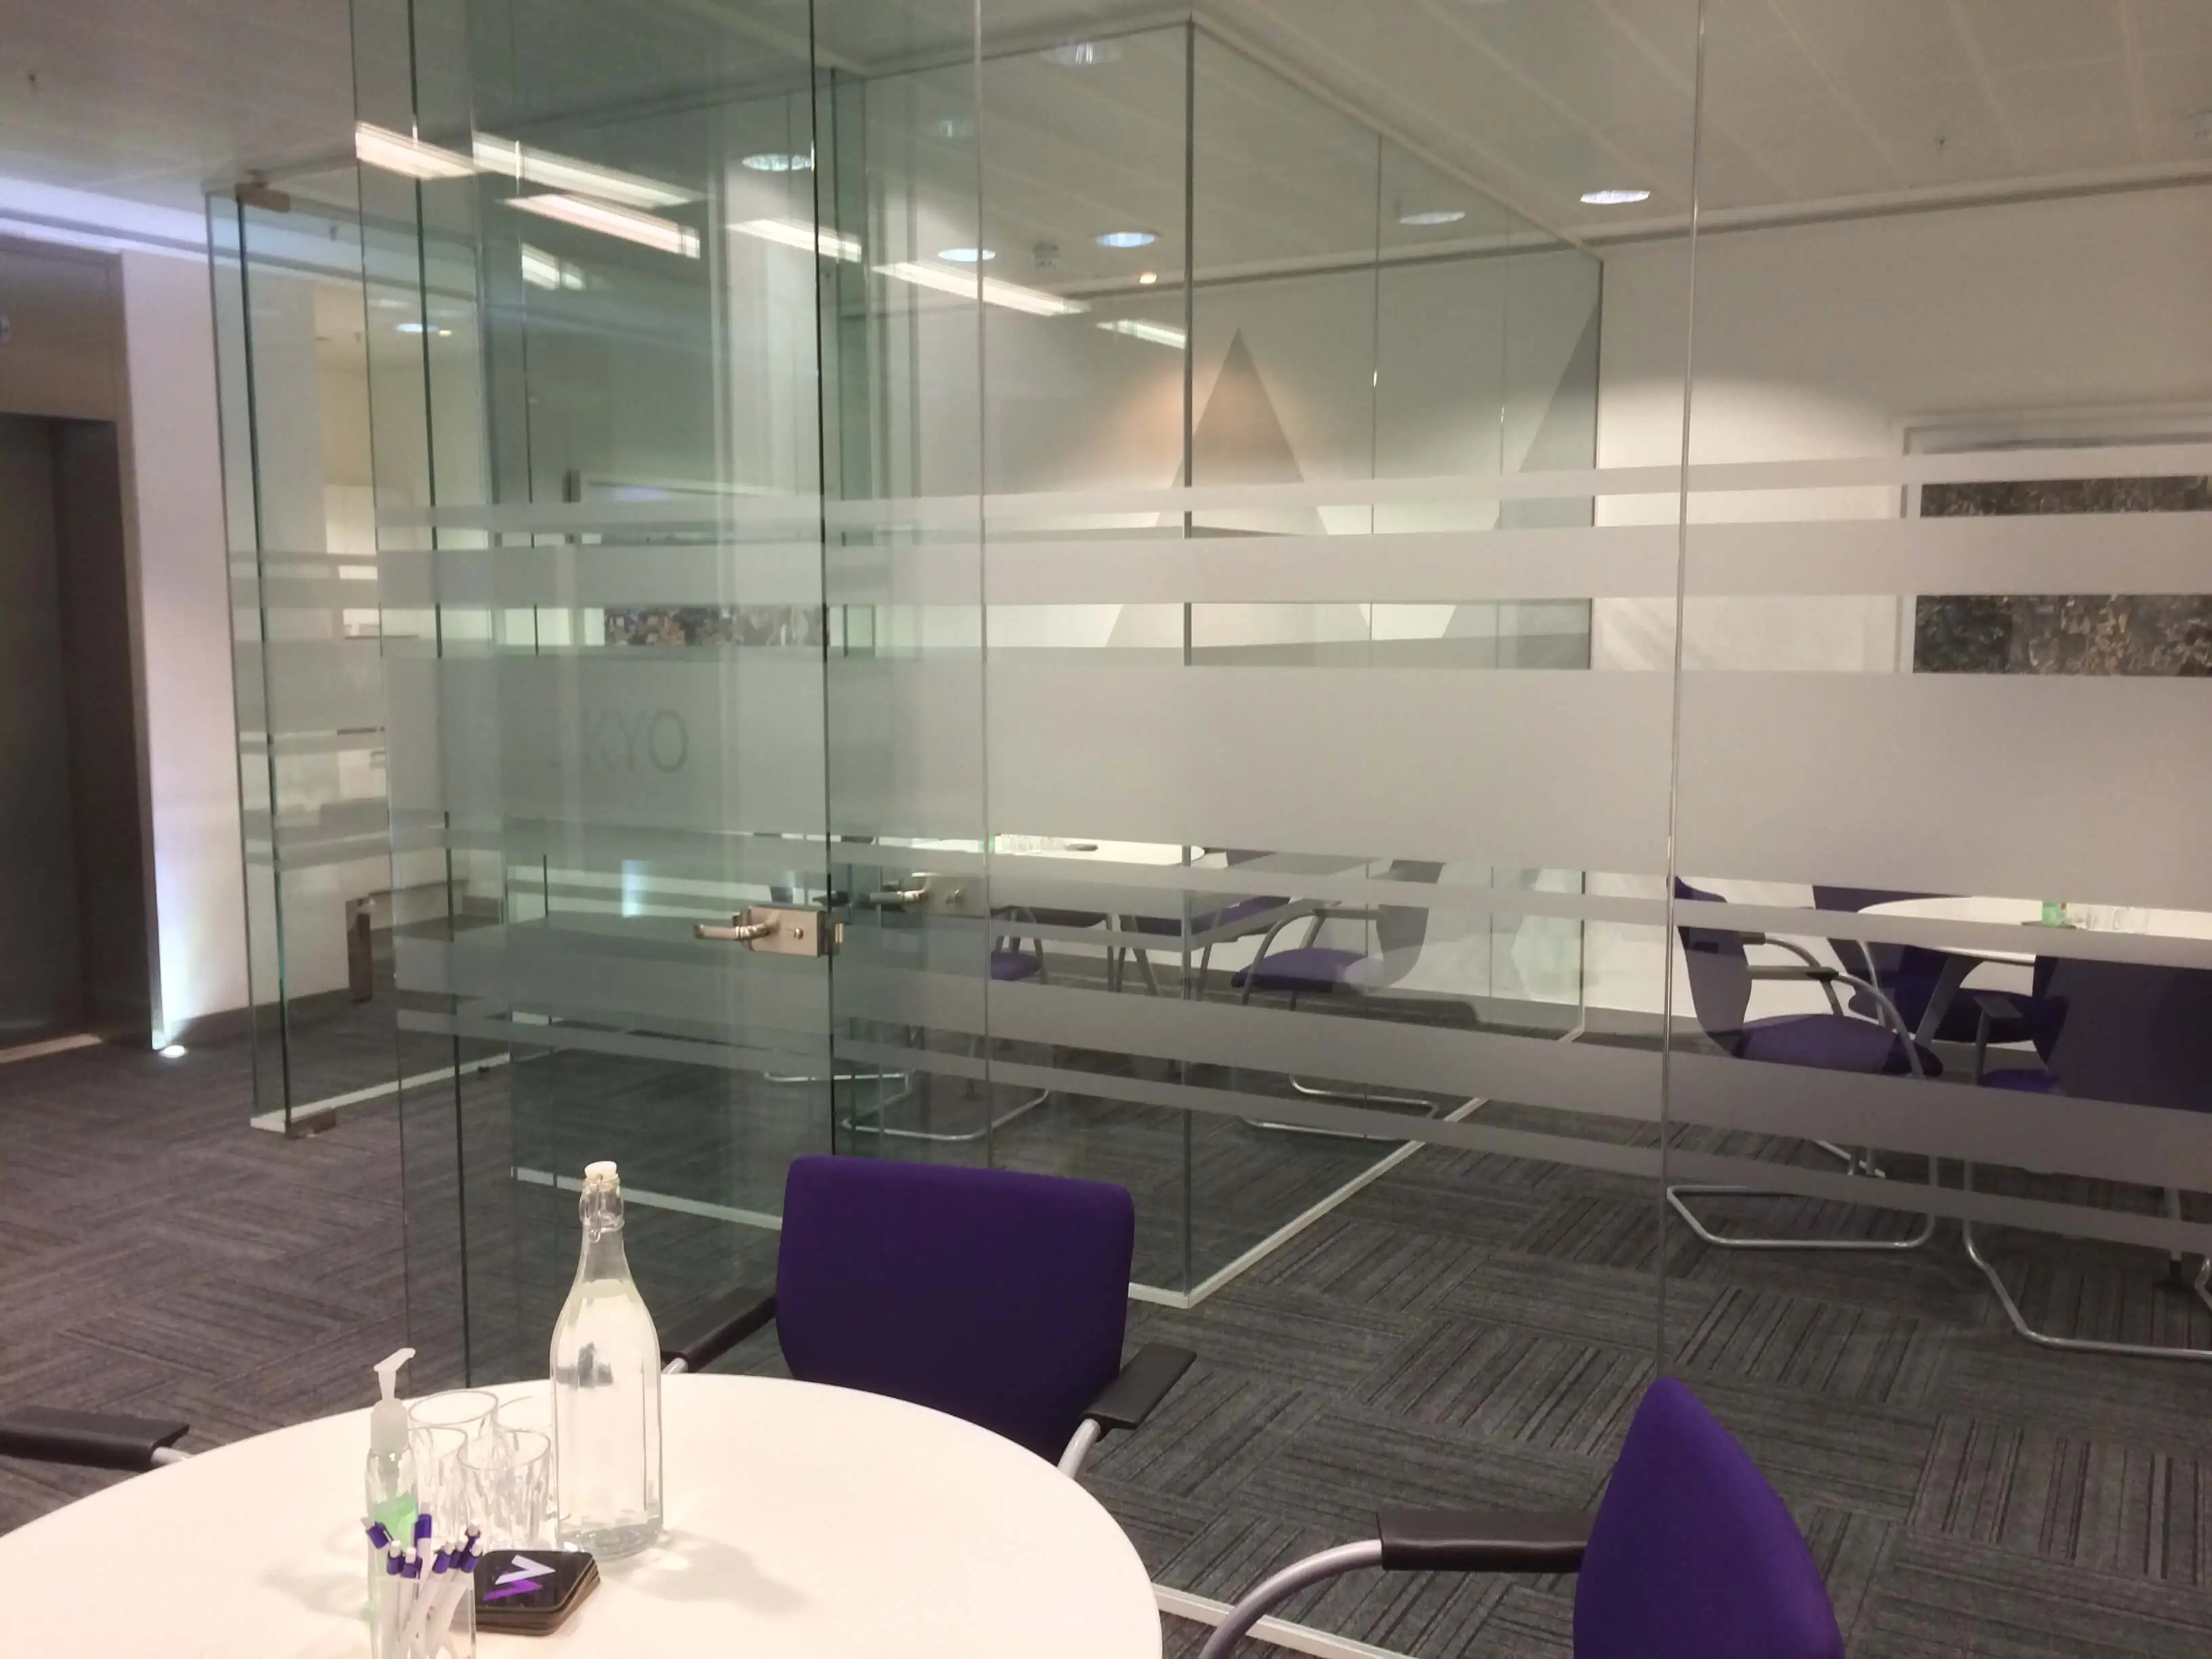 Meeting rooms with multiple round meeting tables with bottles on them